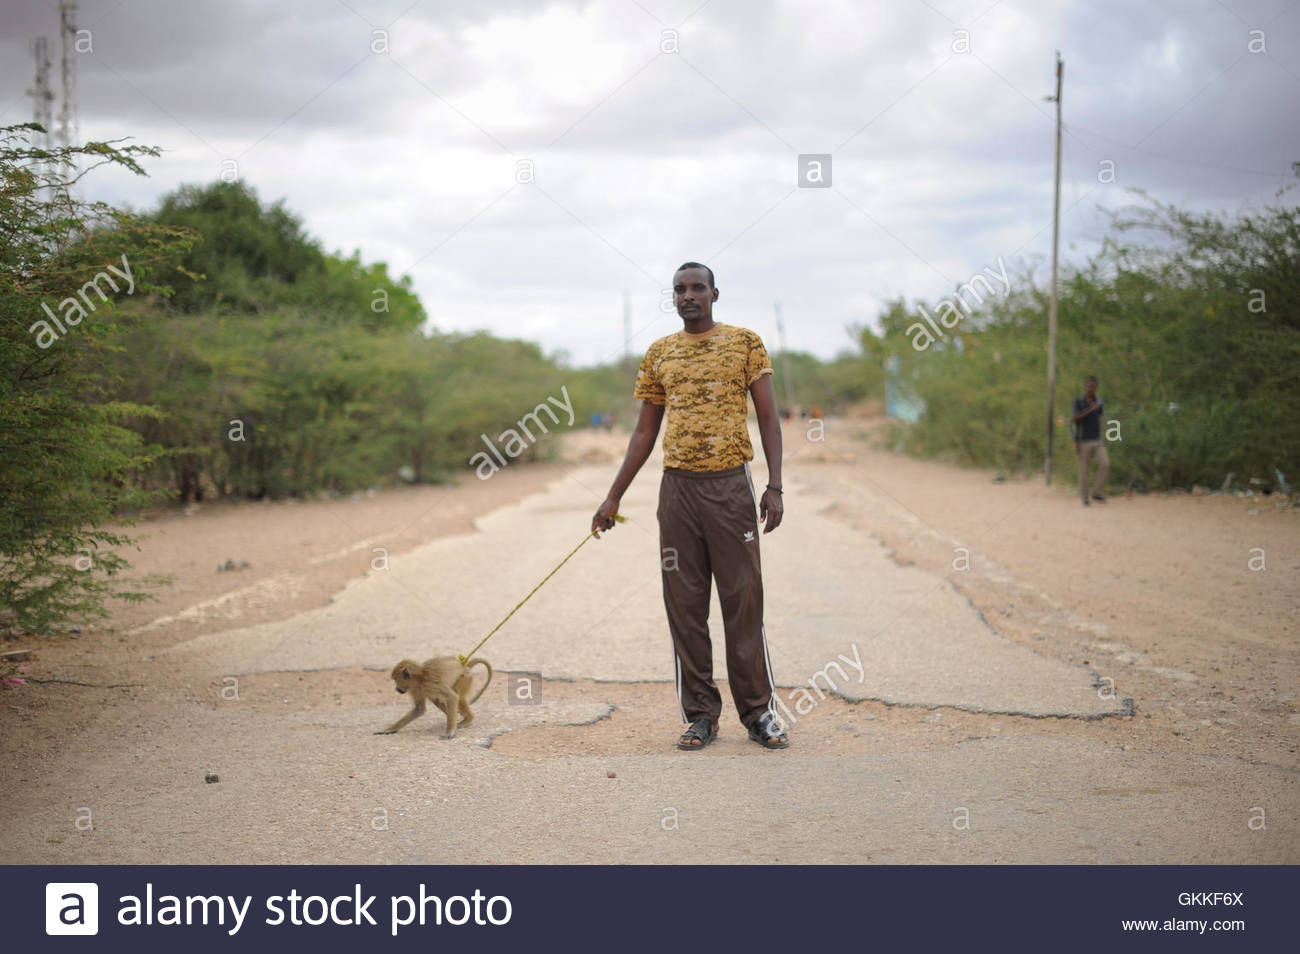 a-member-of-the-somali-national-army-and-his-pet-monkey-stand-in-the-GKKF6X.jpg